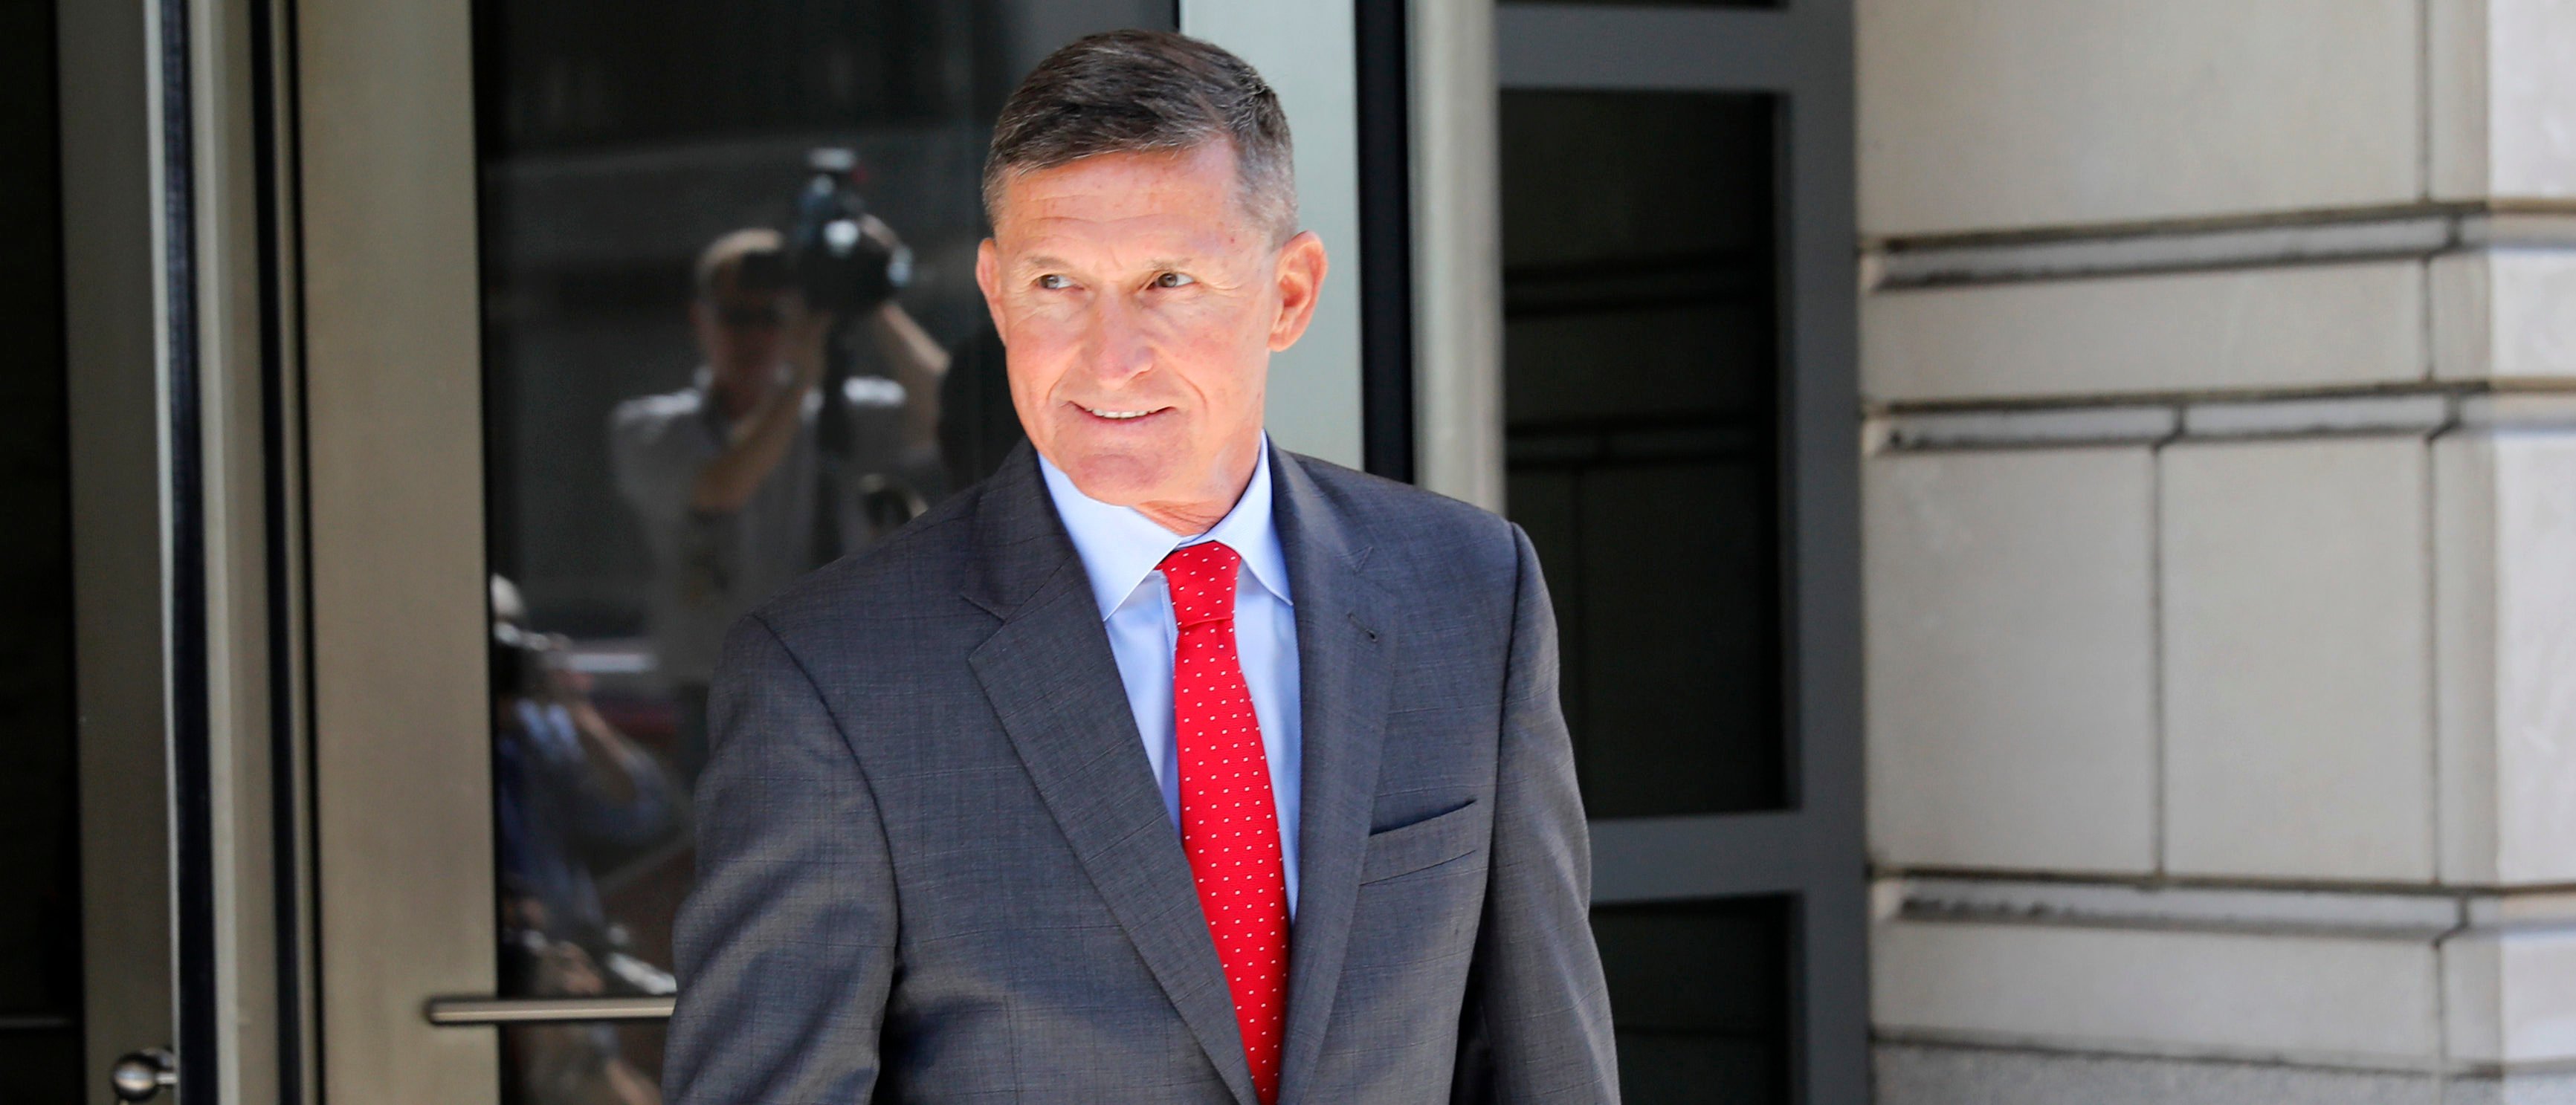 Michael Flynn, former National Security Advisor to President Donald Trump, departs the E. Barrett Prettyman United States Courthouse following a pre-sentencing hearing July 10, 2018 in Washington, DC. (Aaron P. Bernstein/Getty Images)